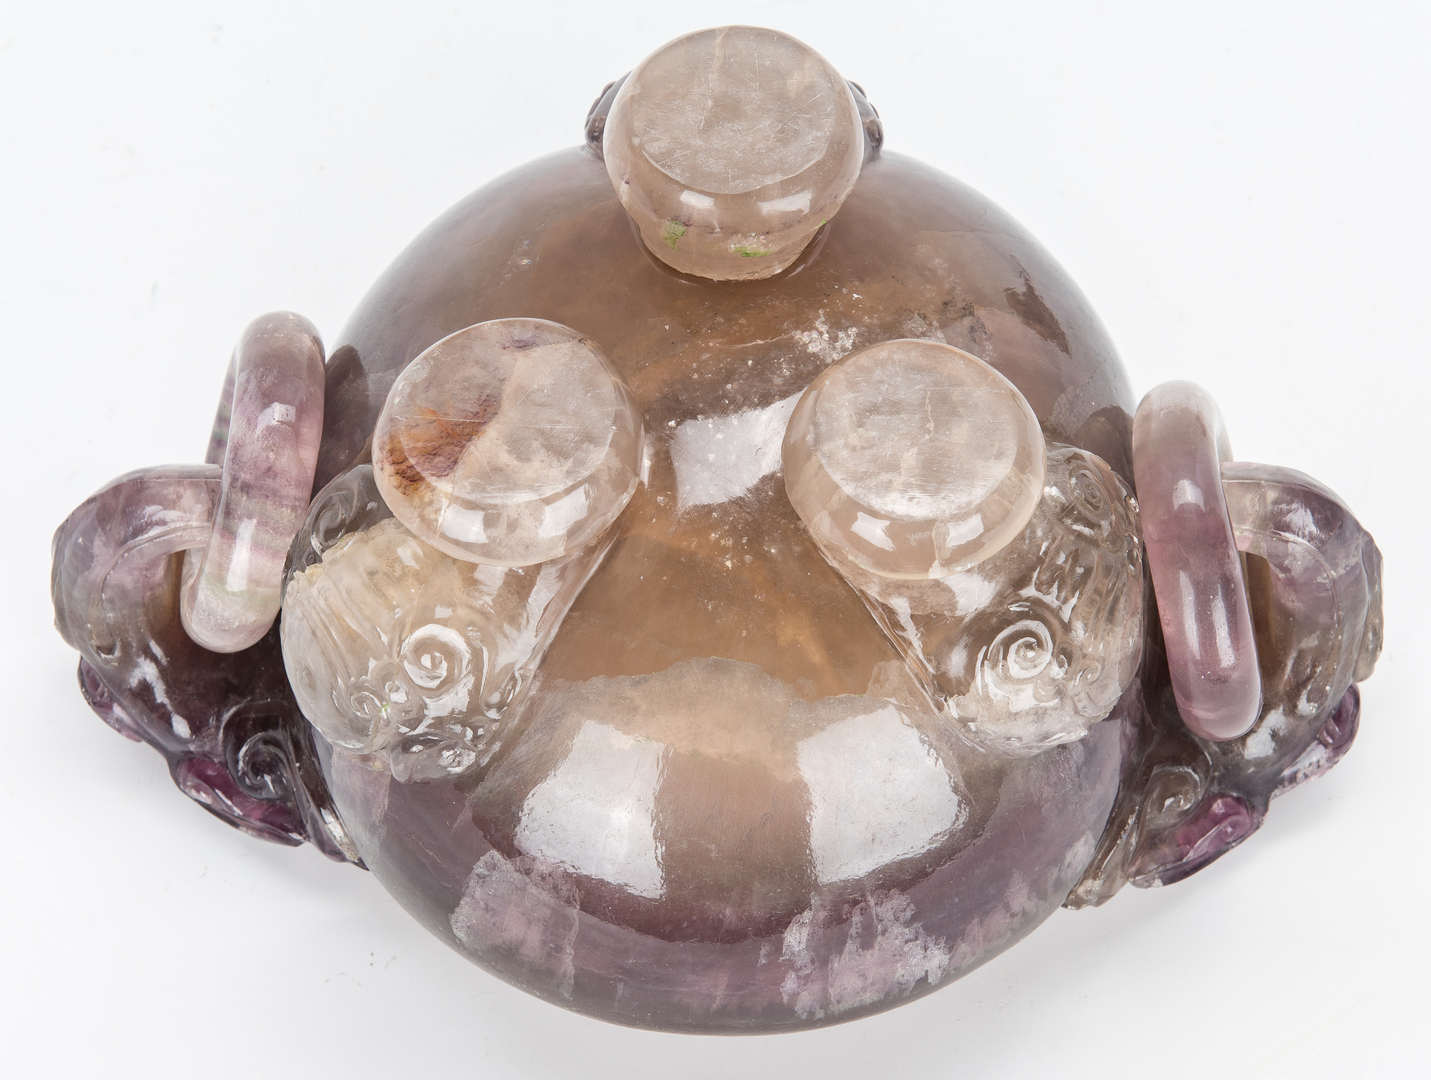 Lot 11: Carved Chinese Agate Censer w/ Foo Dog Finial